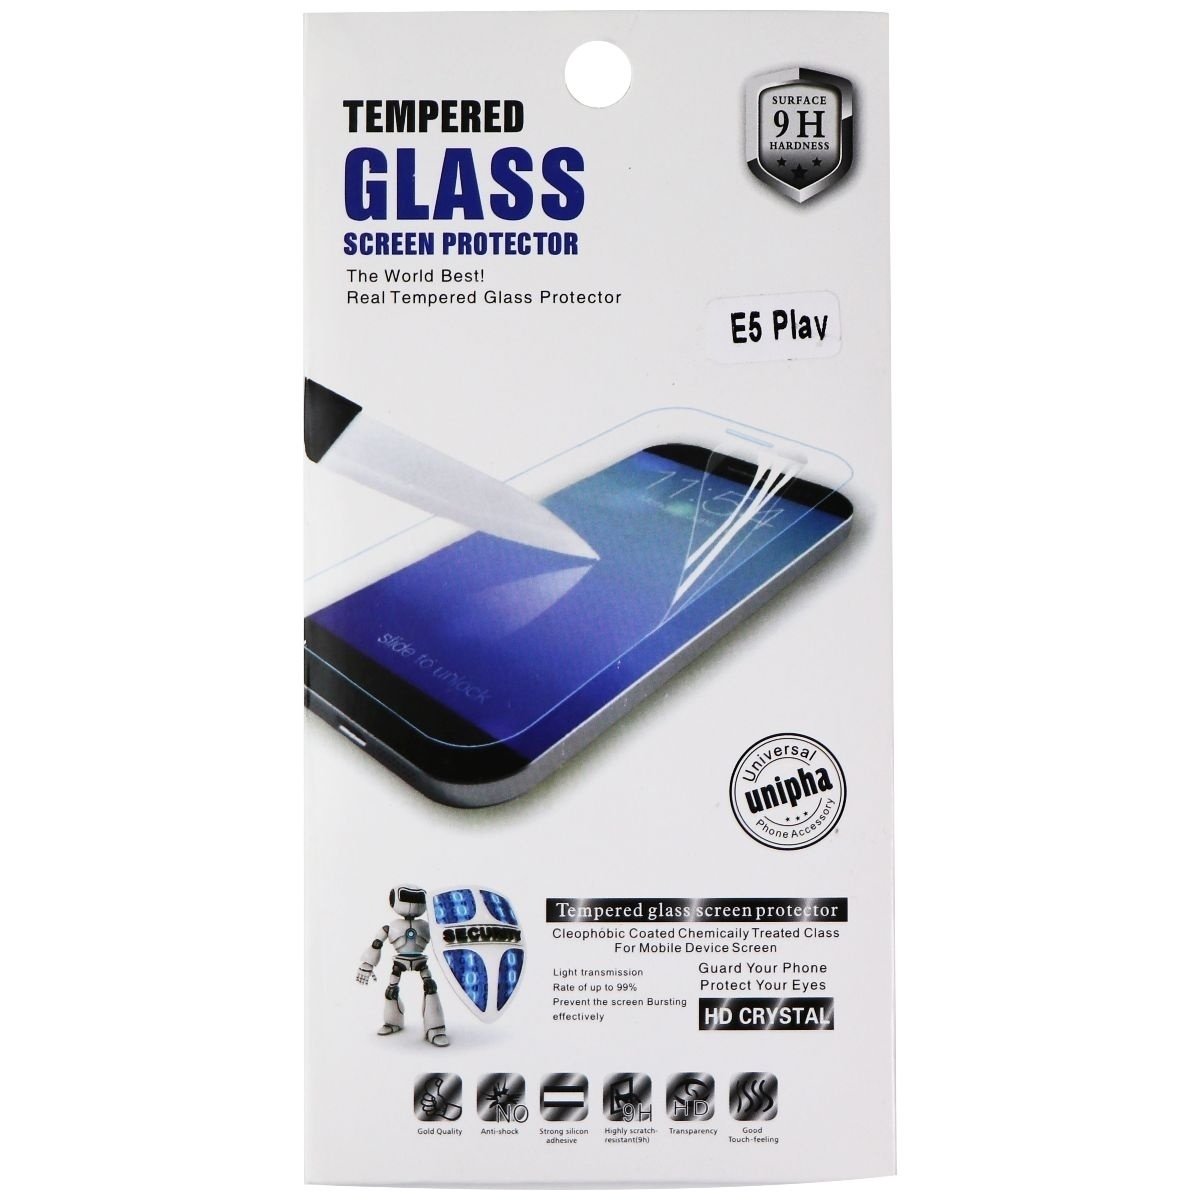 Tempered Glass 9H HD Crystal Screen Protector For Motorola E5 Play - Clear